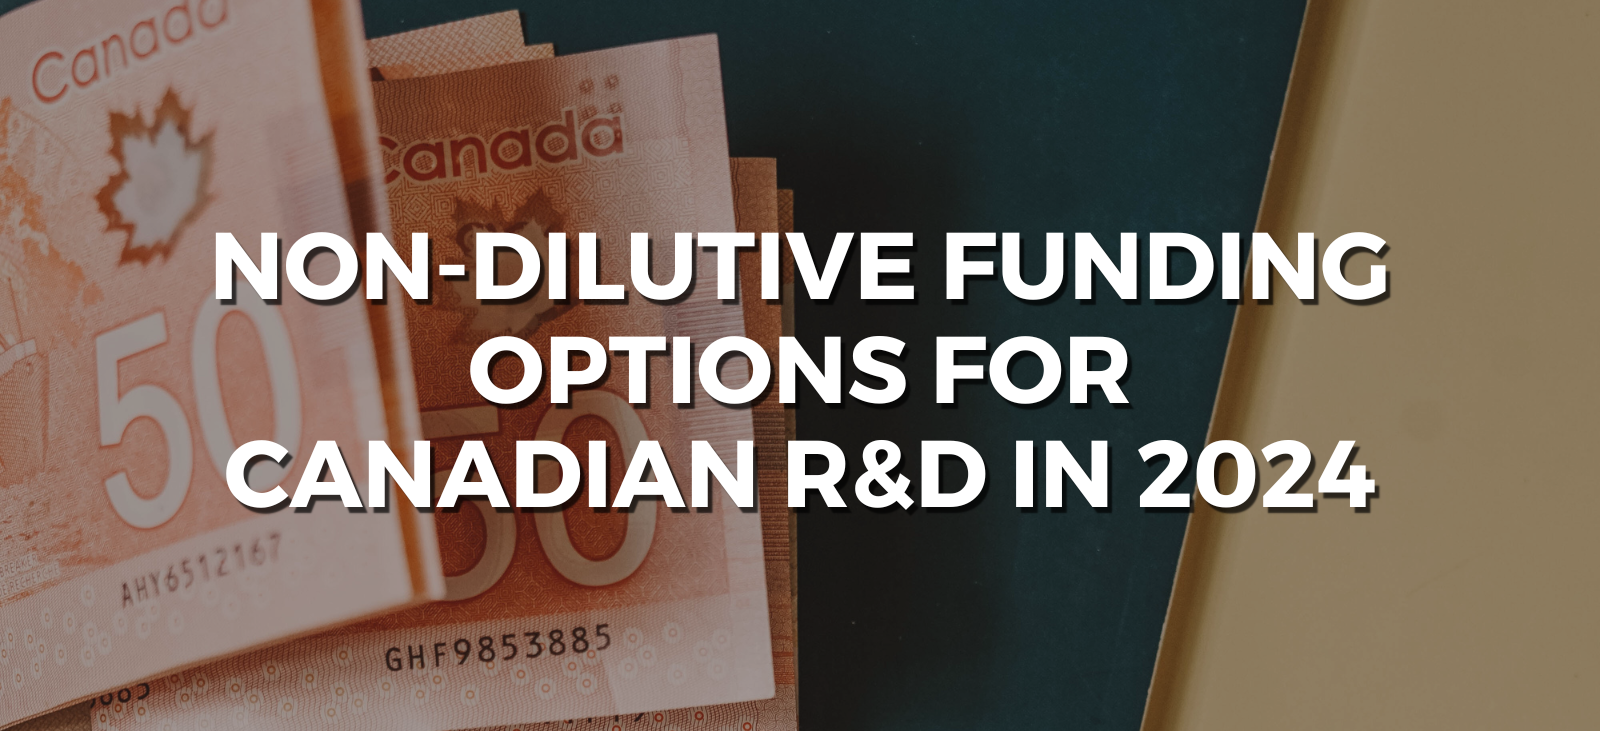 non-dilutive funding options for r&d in canada 2024